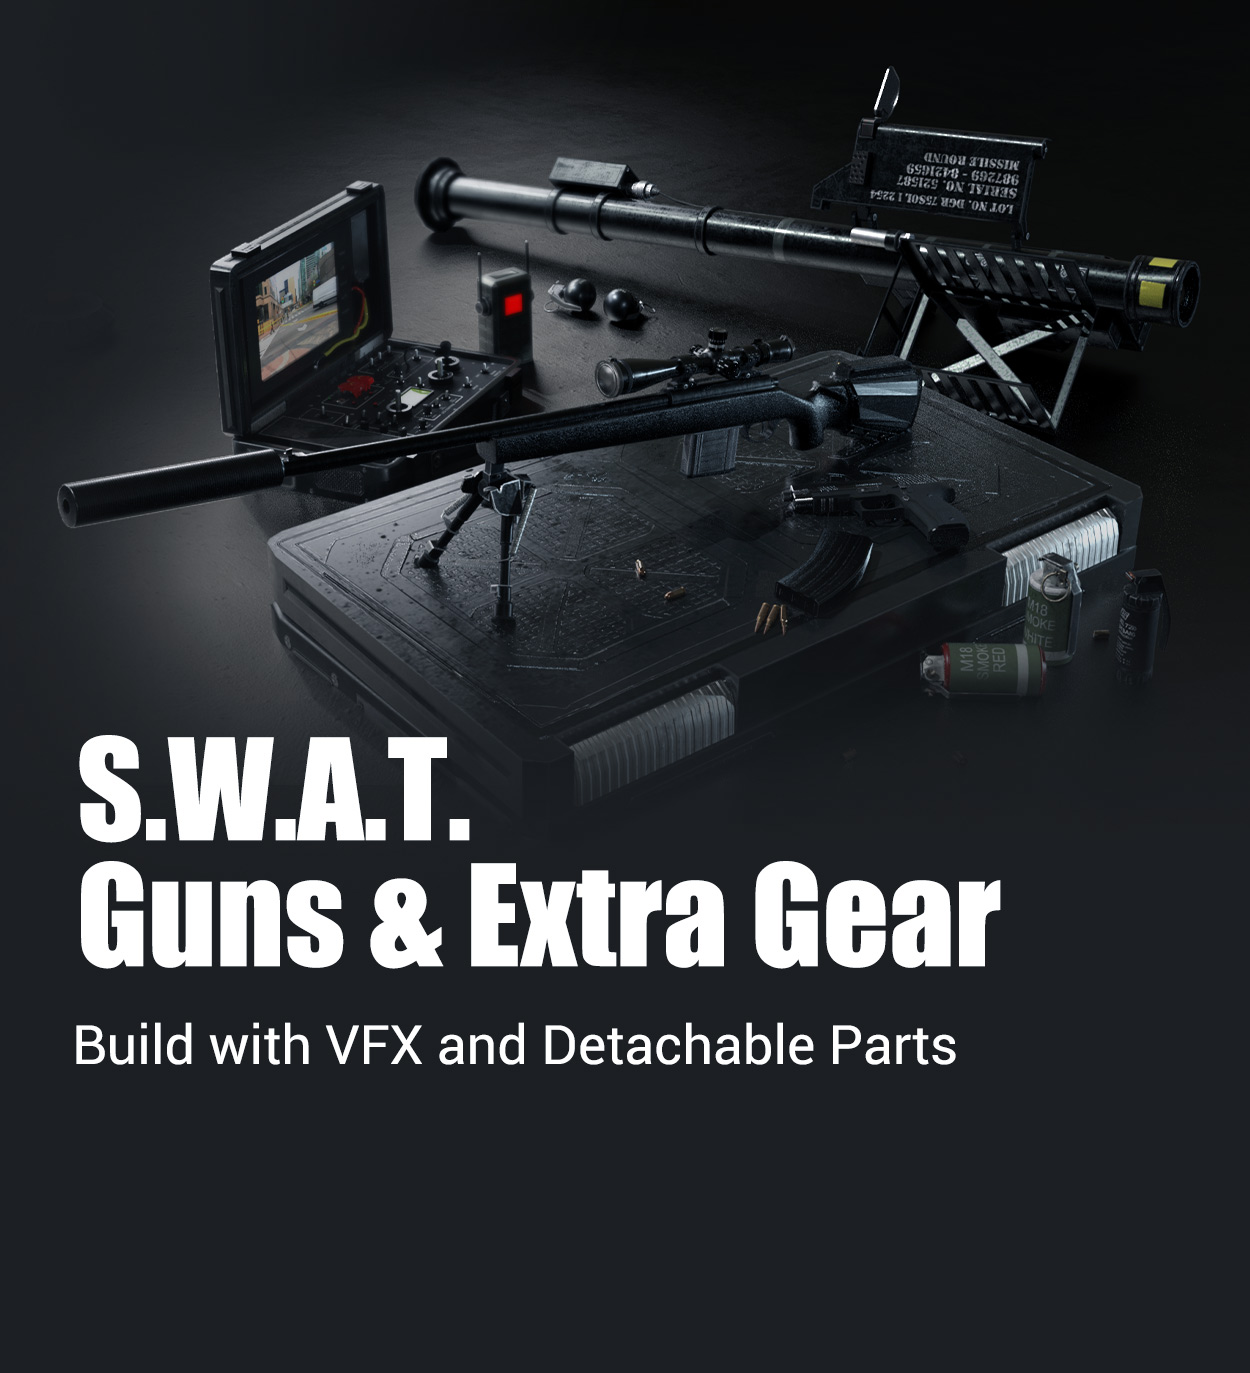 swat character-S.W.A.T. Guns & Extra Gear